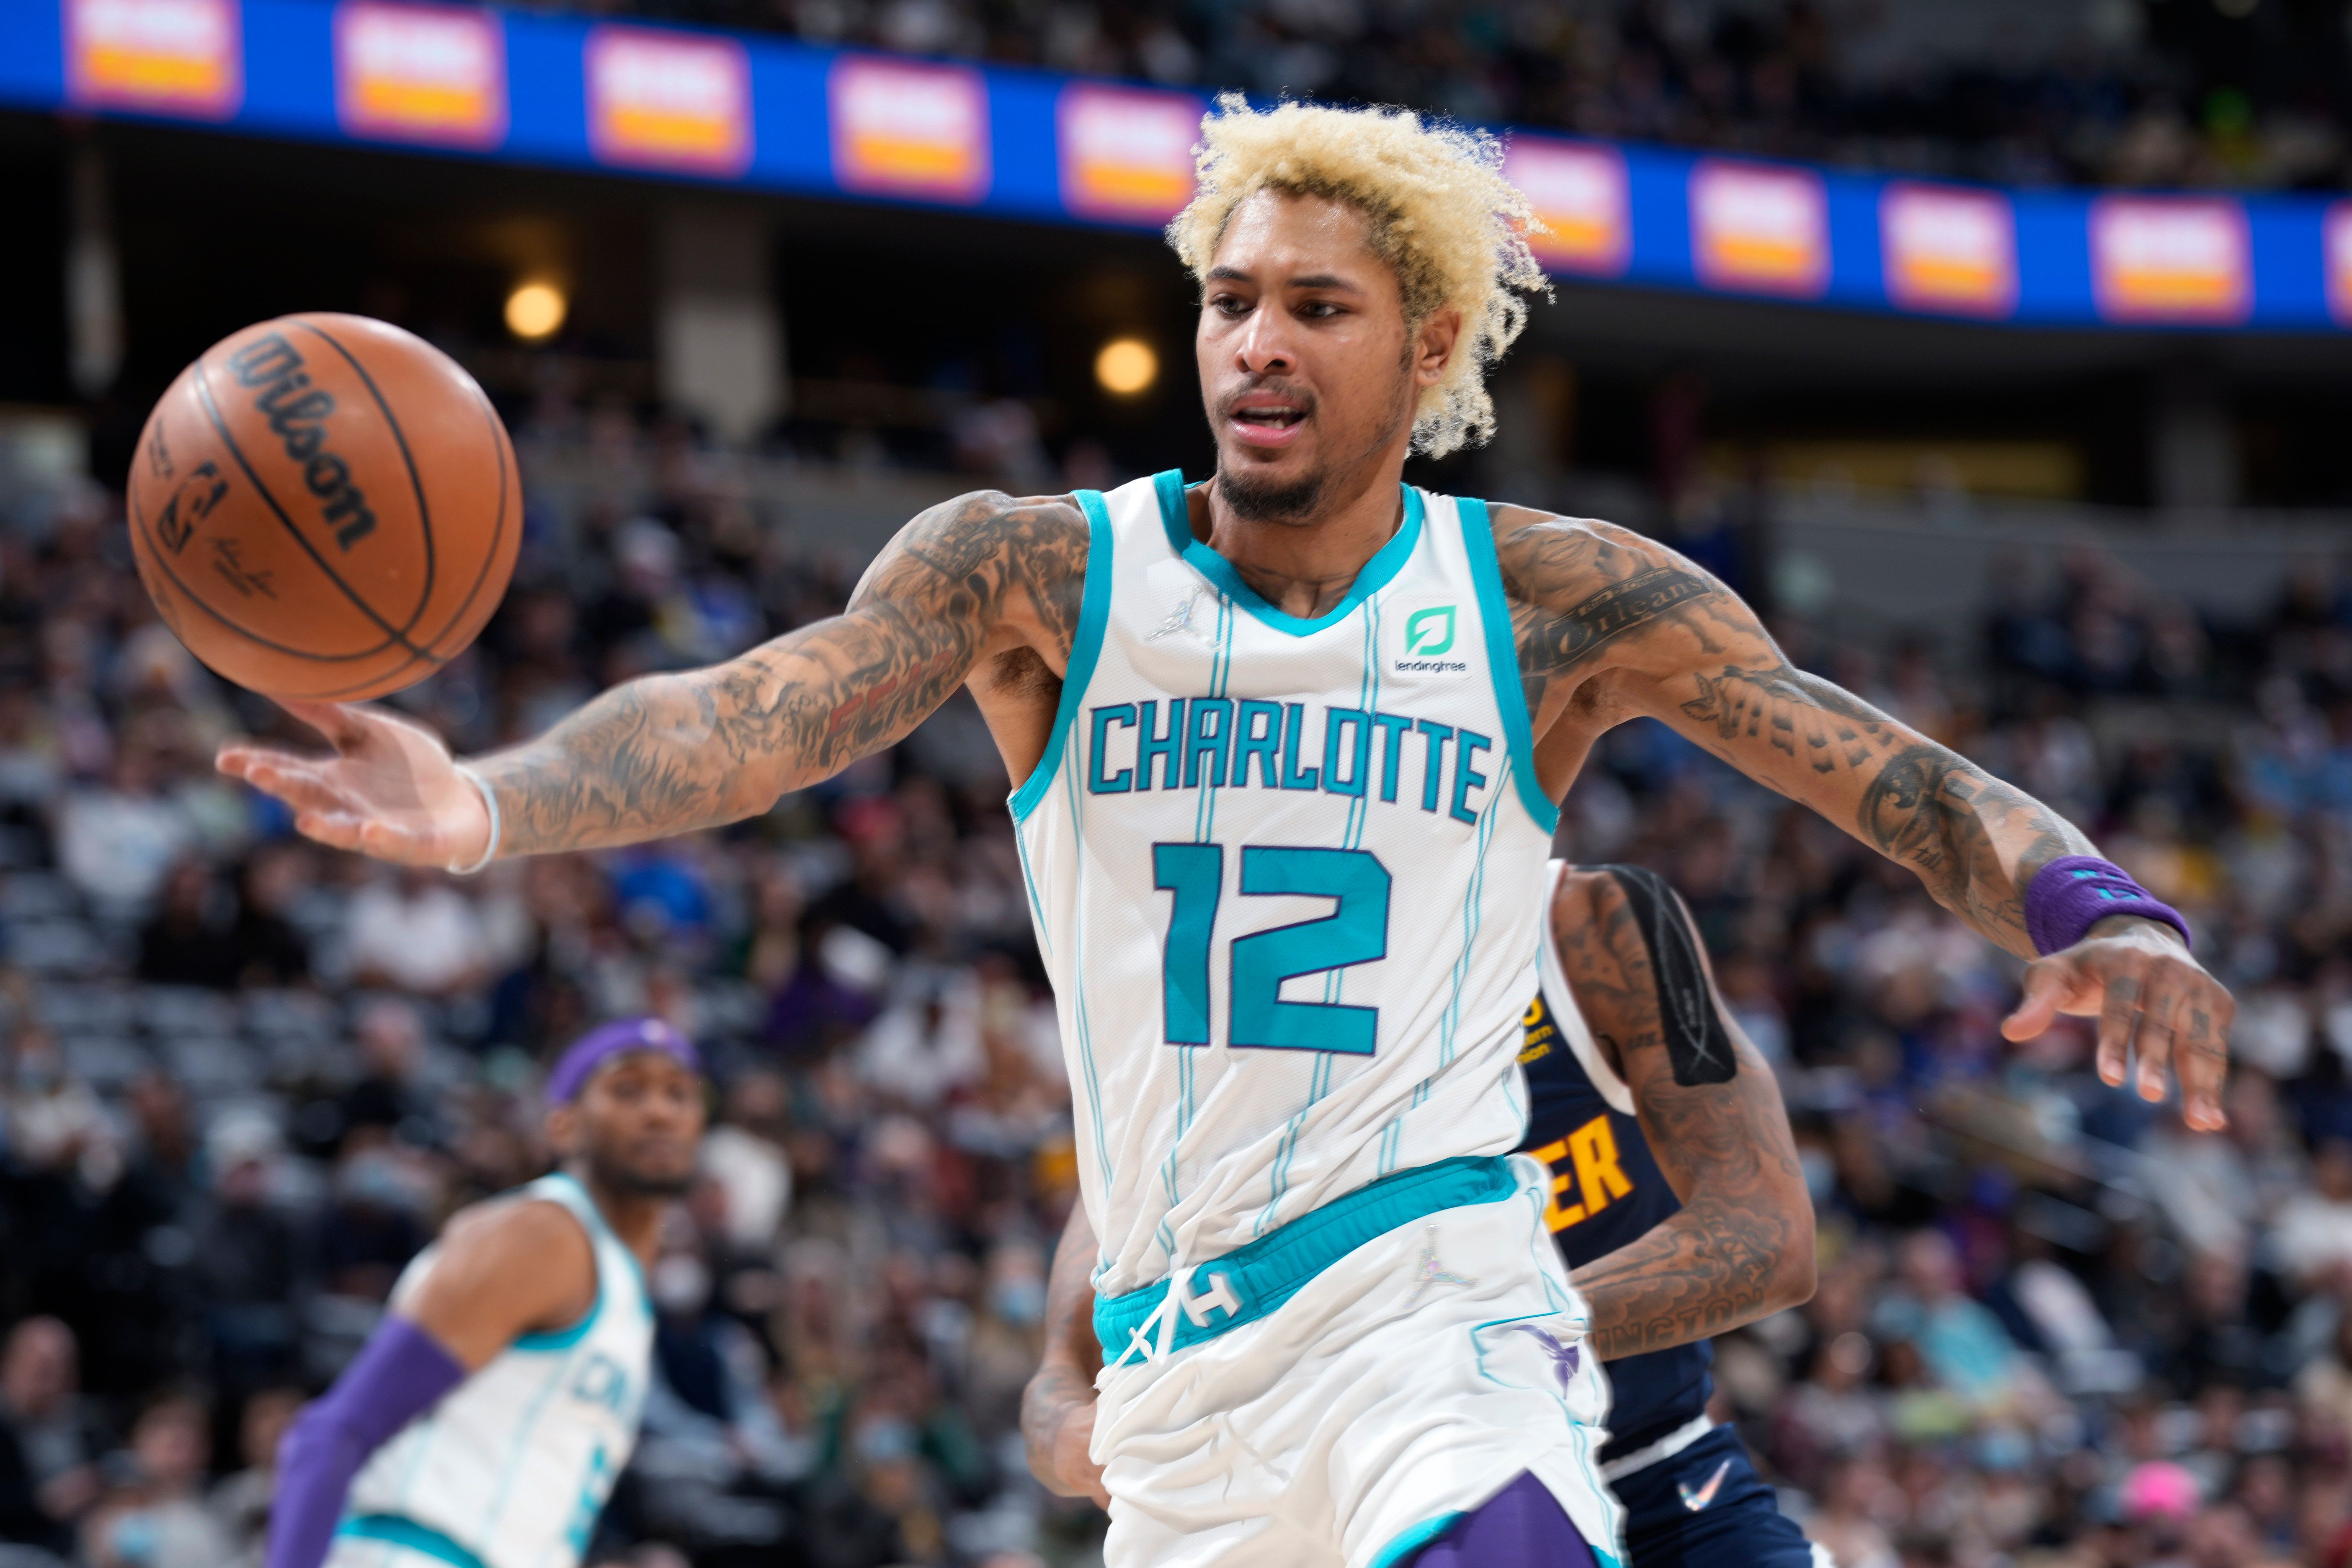 Washington, Oubre help Hornets rally past Nuggets, 115-107 | The